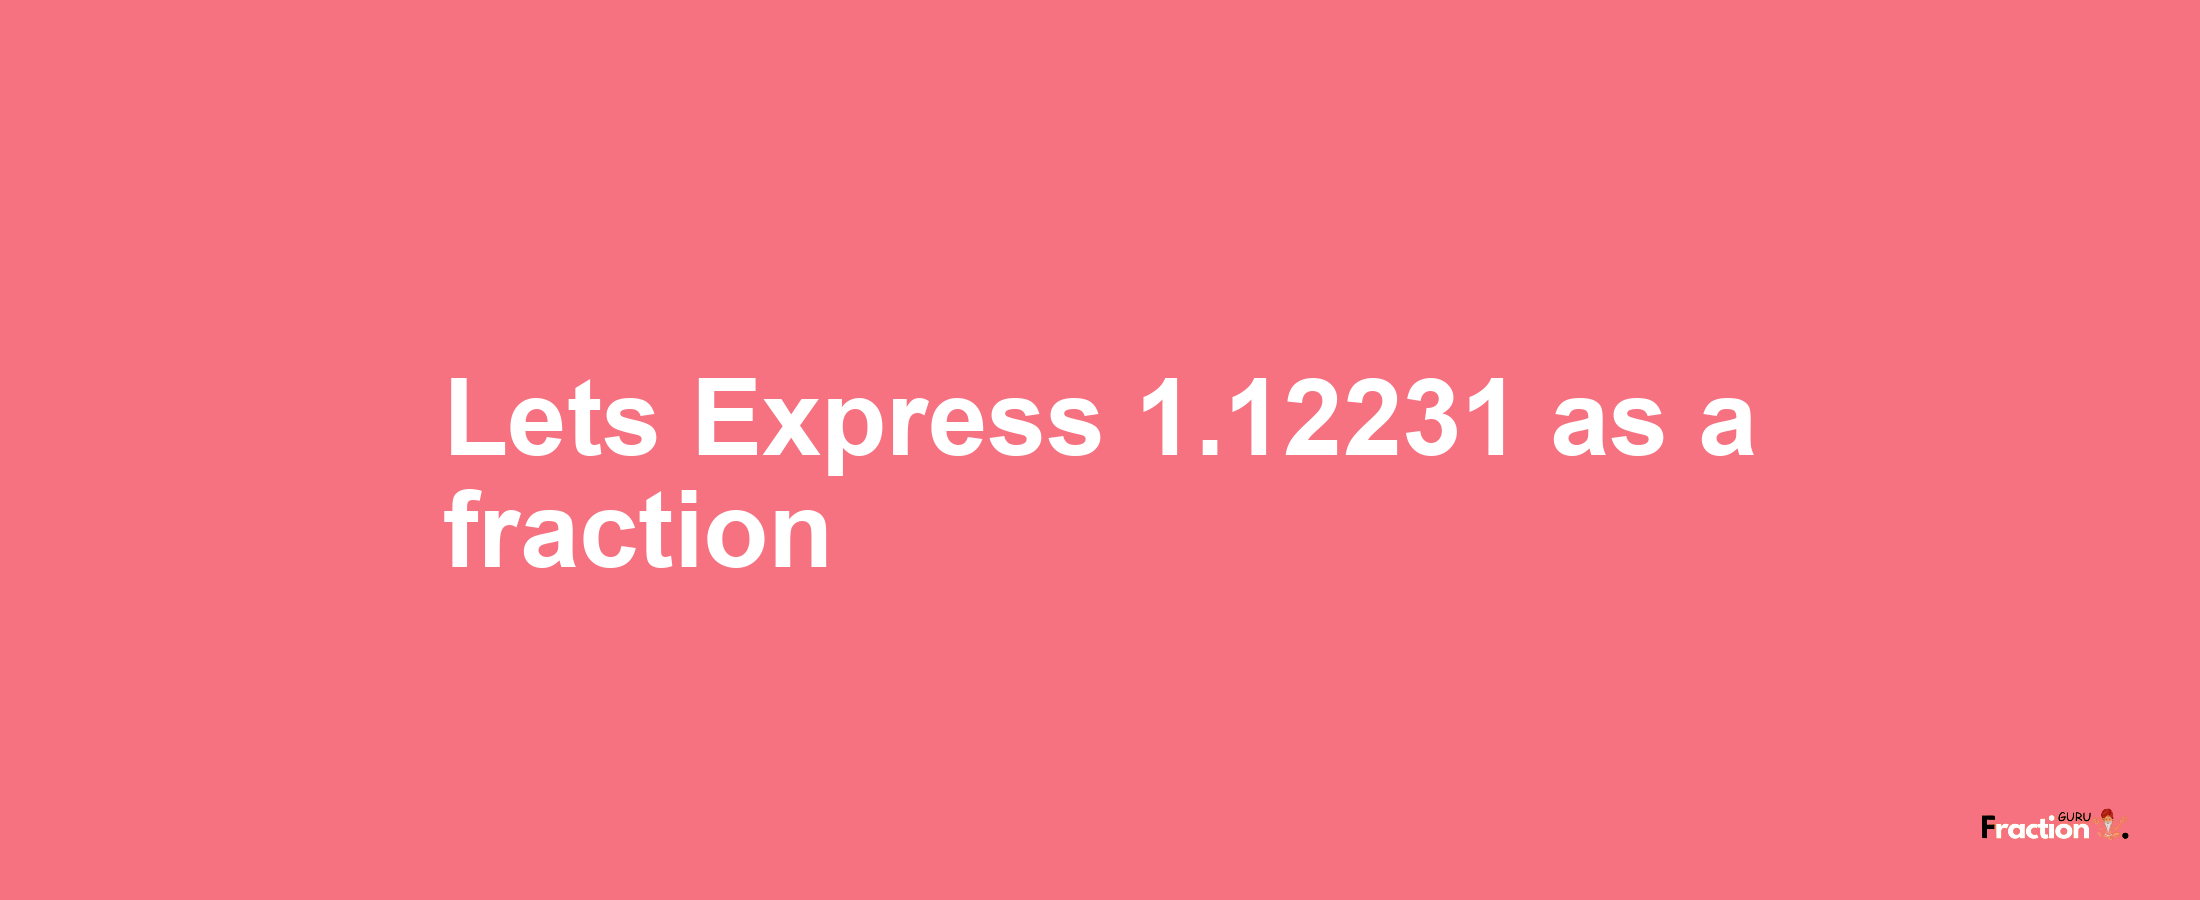 Lets Express 1.12231 as afraction